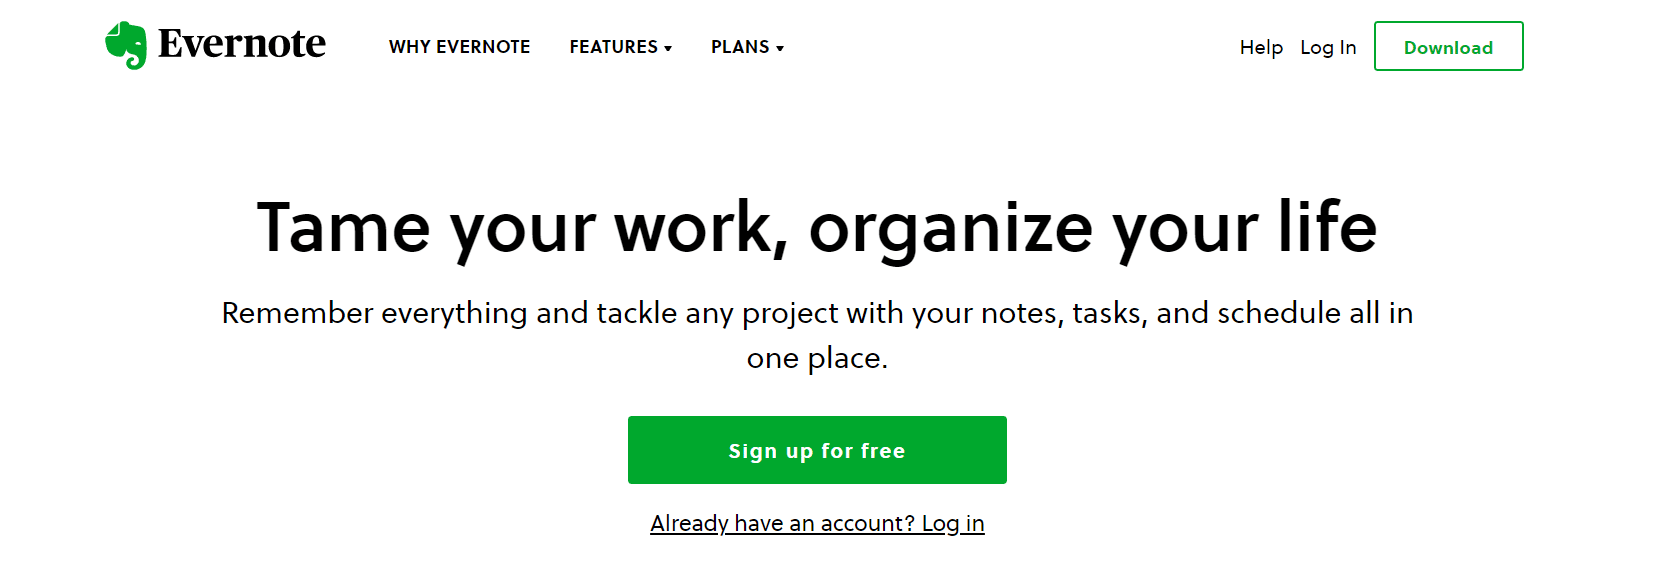 Evernote - Productivity Software